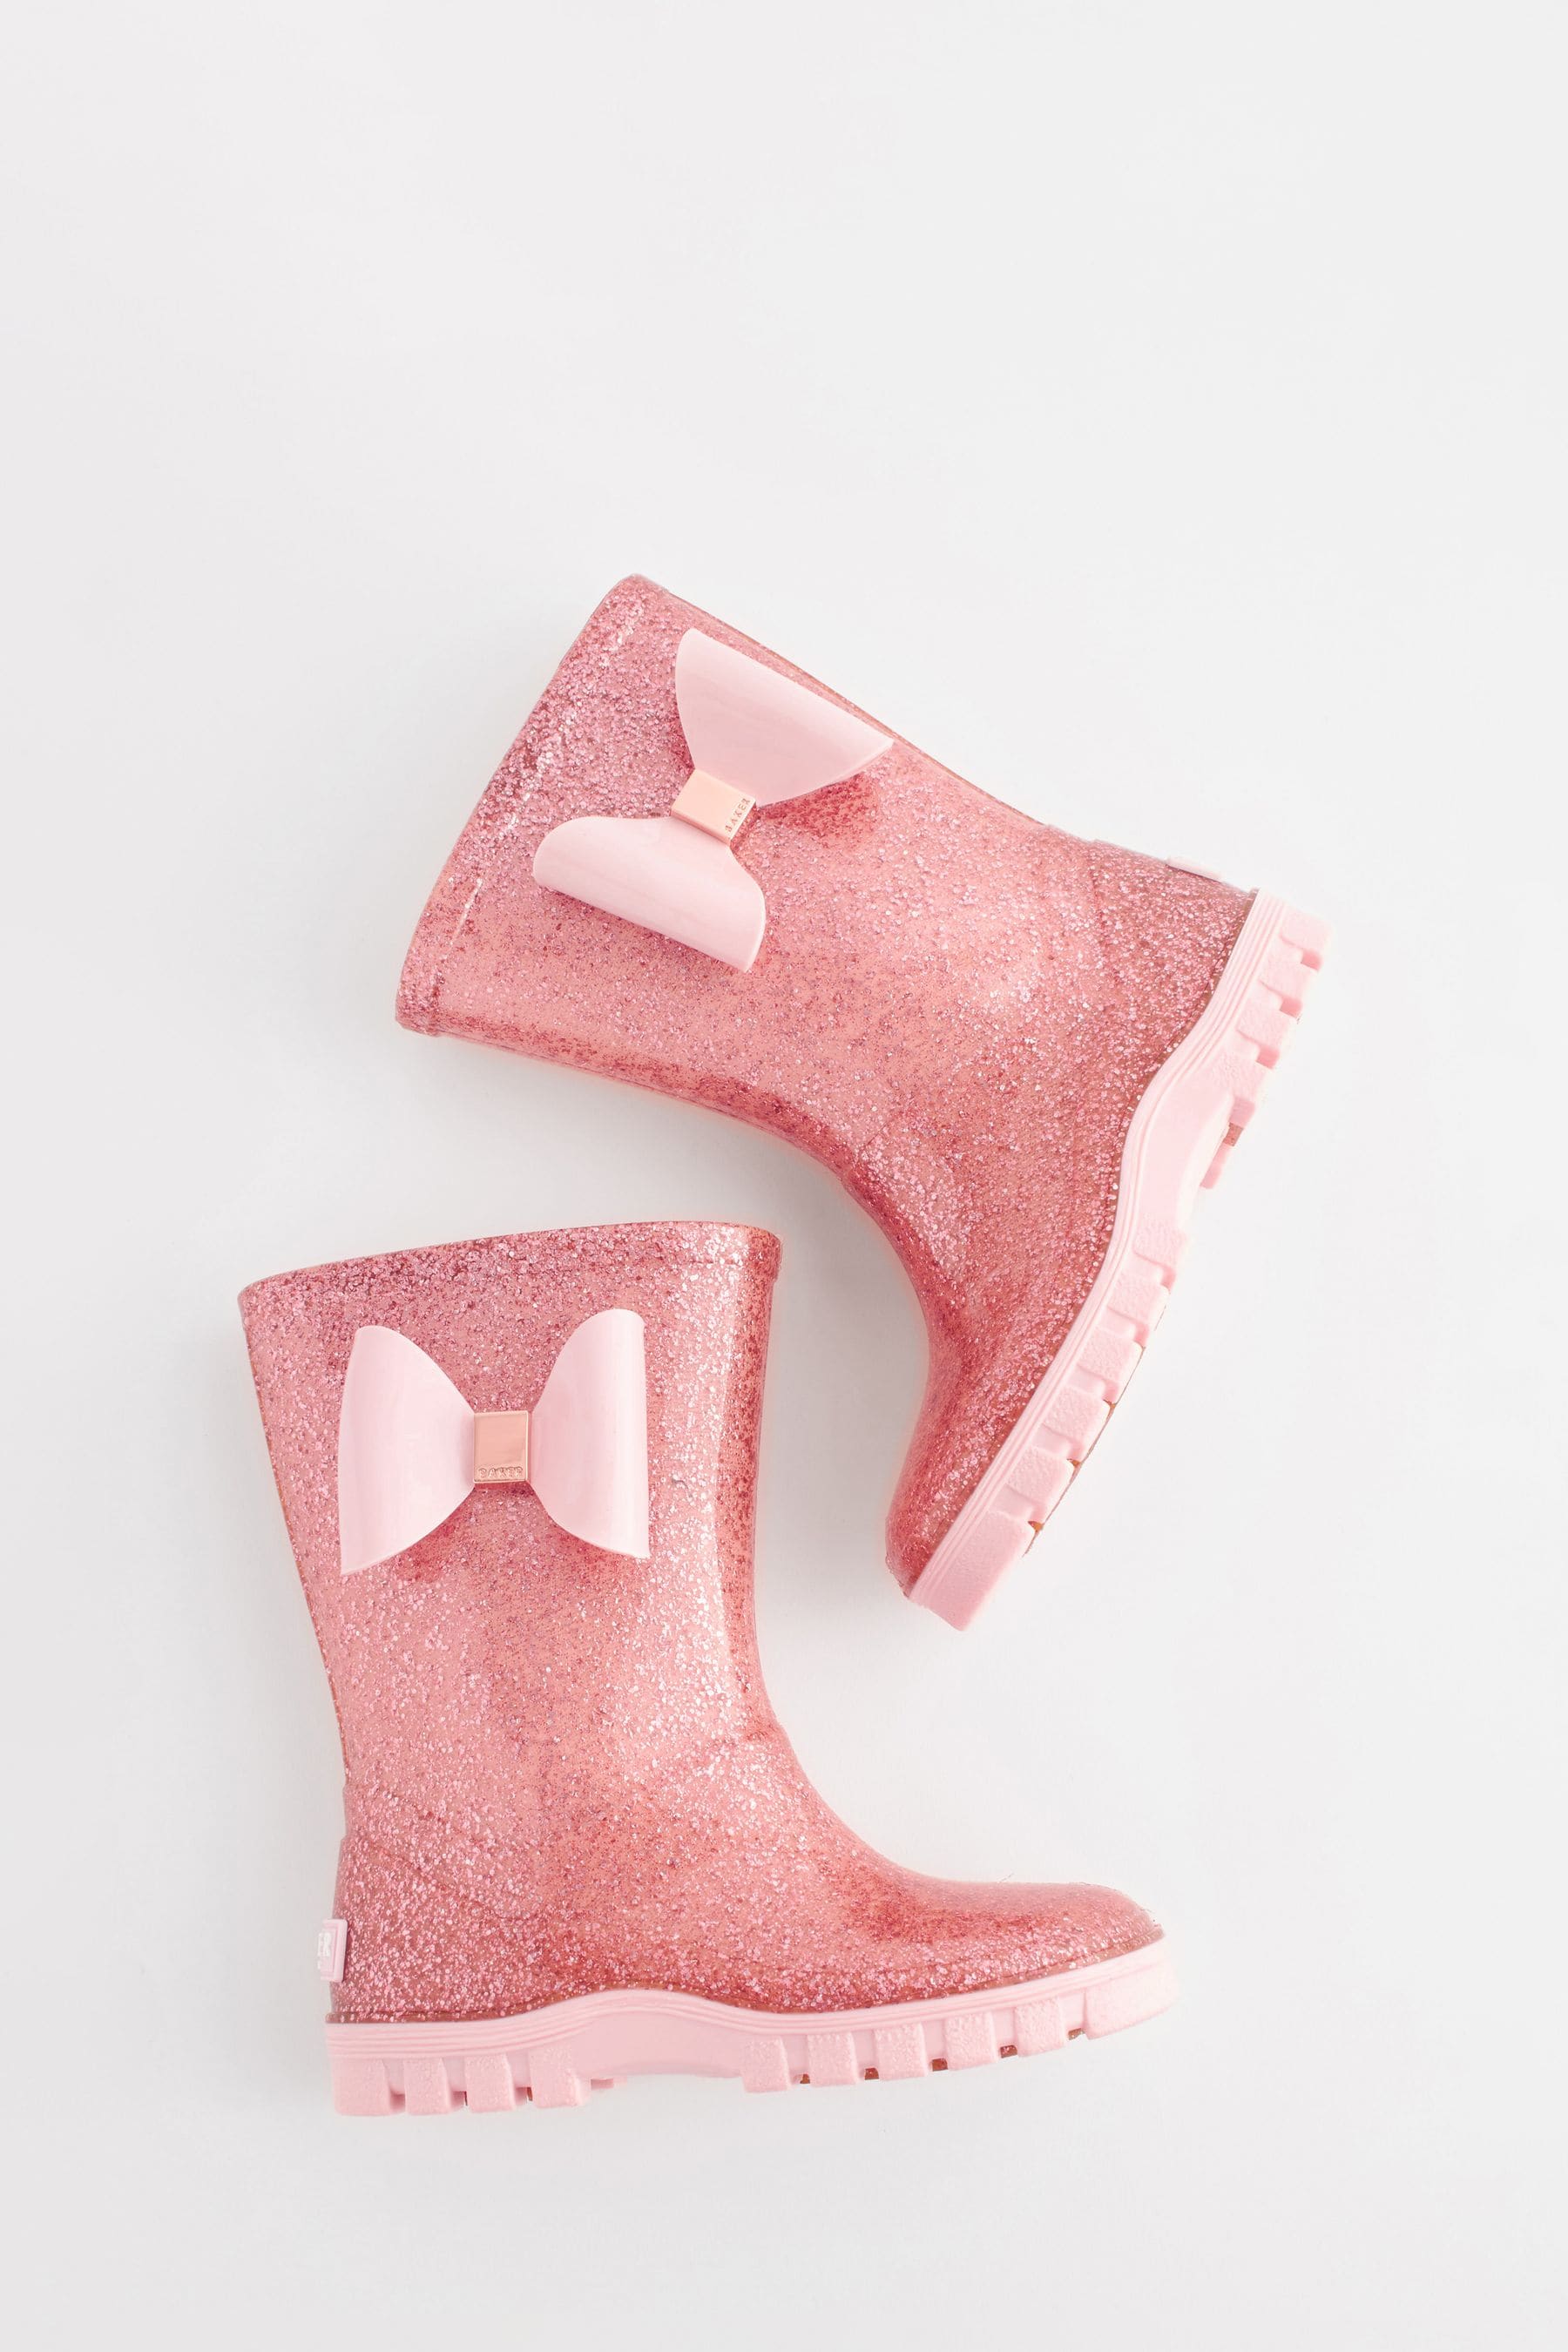 Buy Baker by Ted Baker Girls Pink Glitter Welly Boots with Bow from the ...